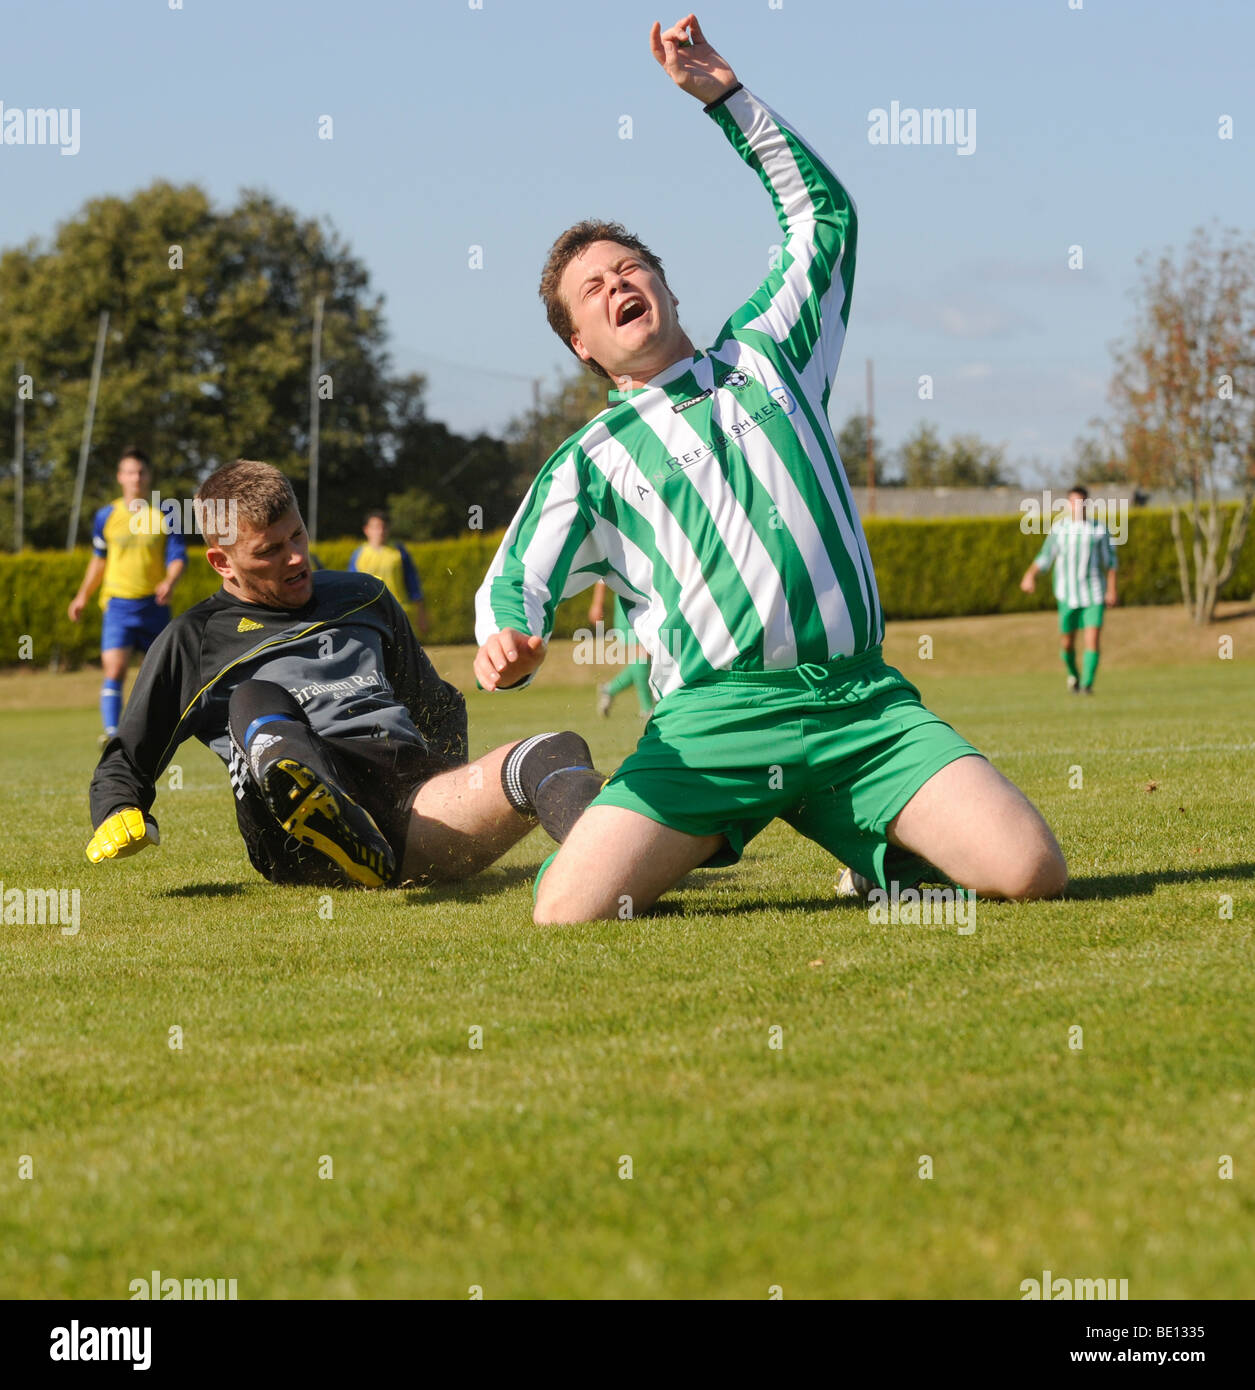 Tow football players clash in a tackle at a local level football match in Rotherfield, East Sussex. UK Stock Photo